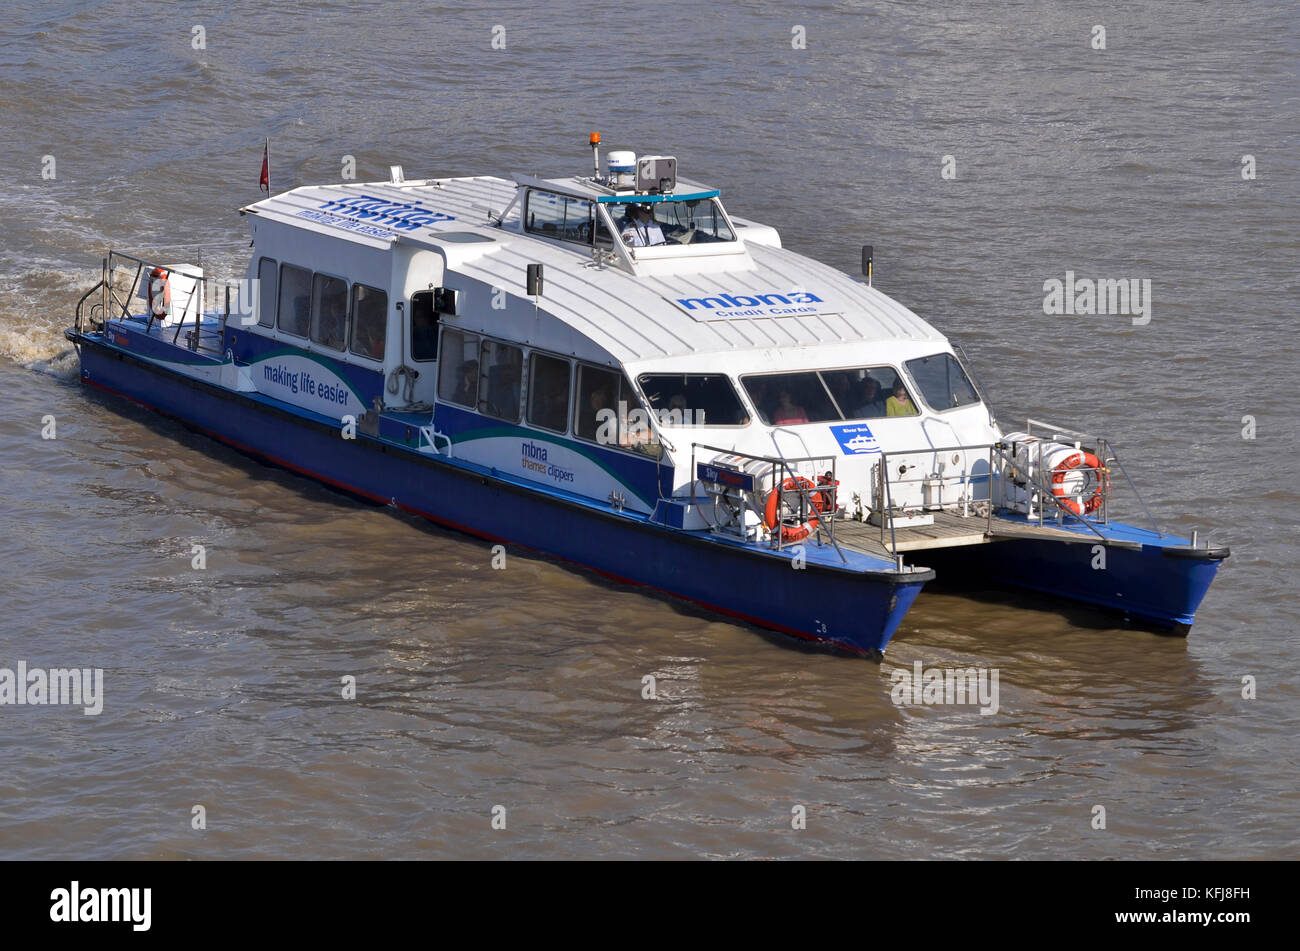 Sky Odyssey Fluss bus Boot von mbna Thames Clippers, Themse, London, England betrieben. Stockfoto